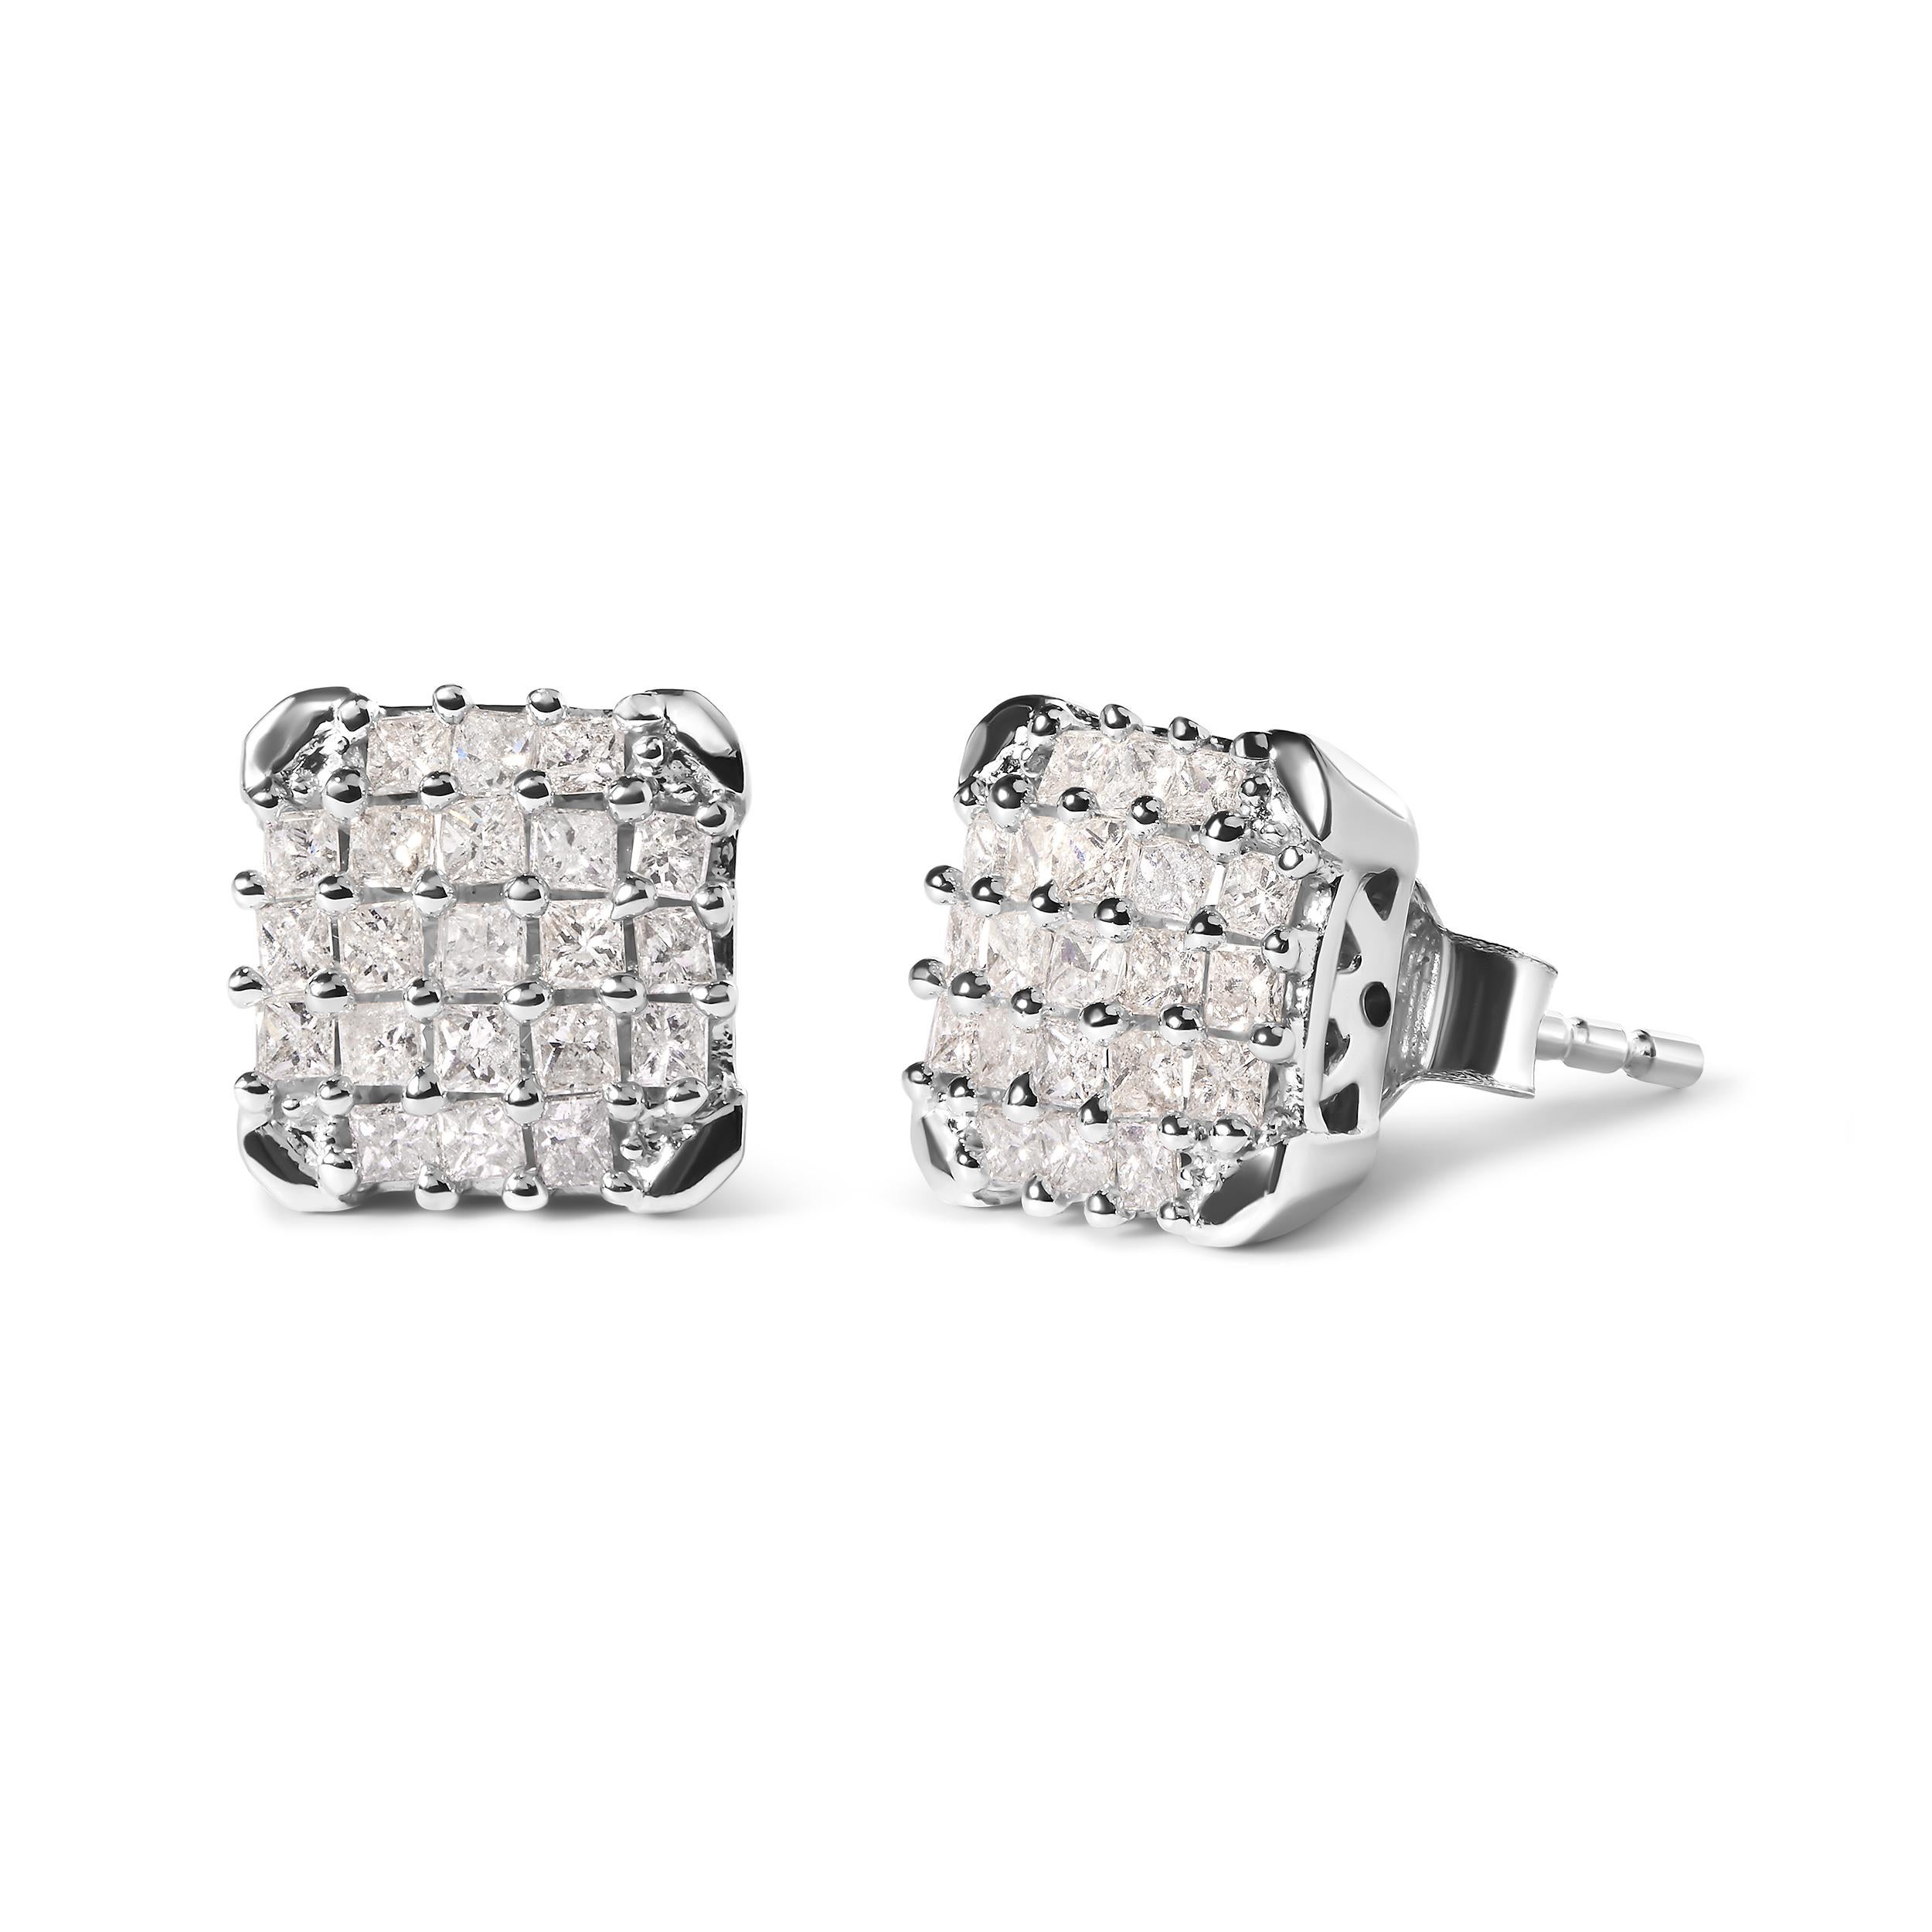 Indulge in the exquisite beauty of these 10K white gold diamond composite stud earrings. Adorned with 42 natural princess diamonds, these earrings boast a total weight of 3/4 cttw. The open frame design adds a touch of elegance, while the prong